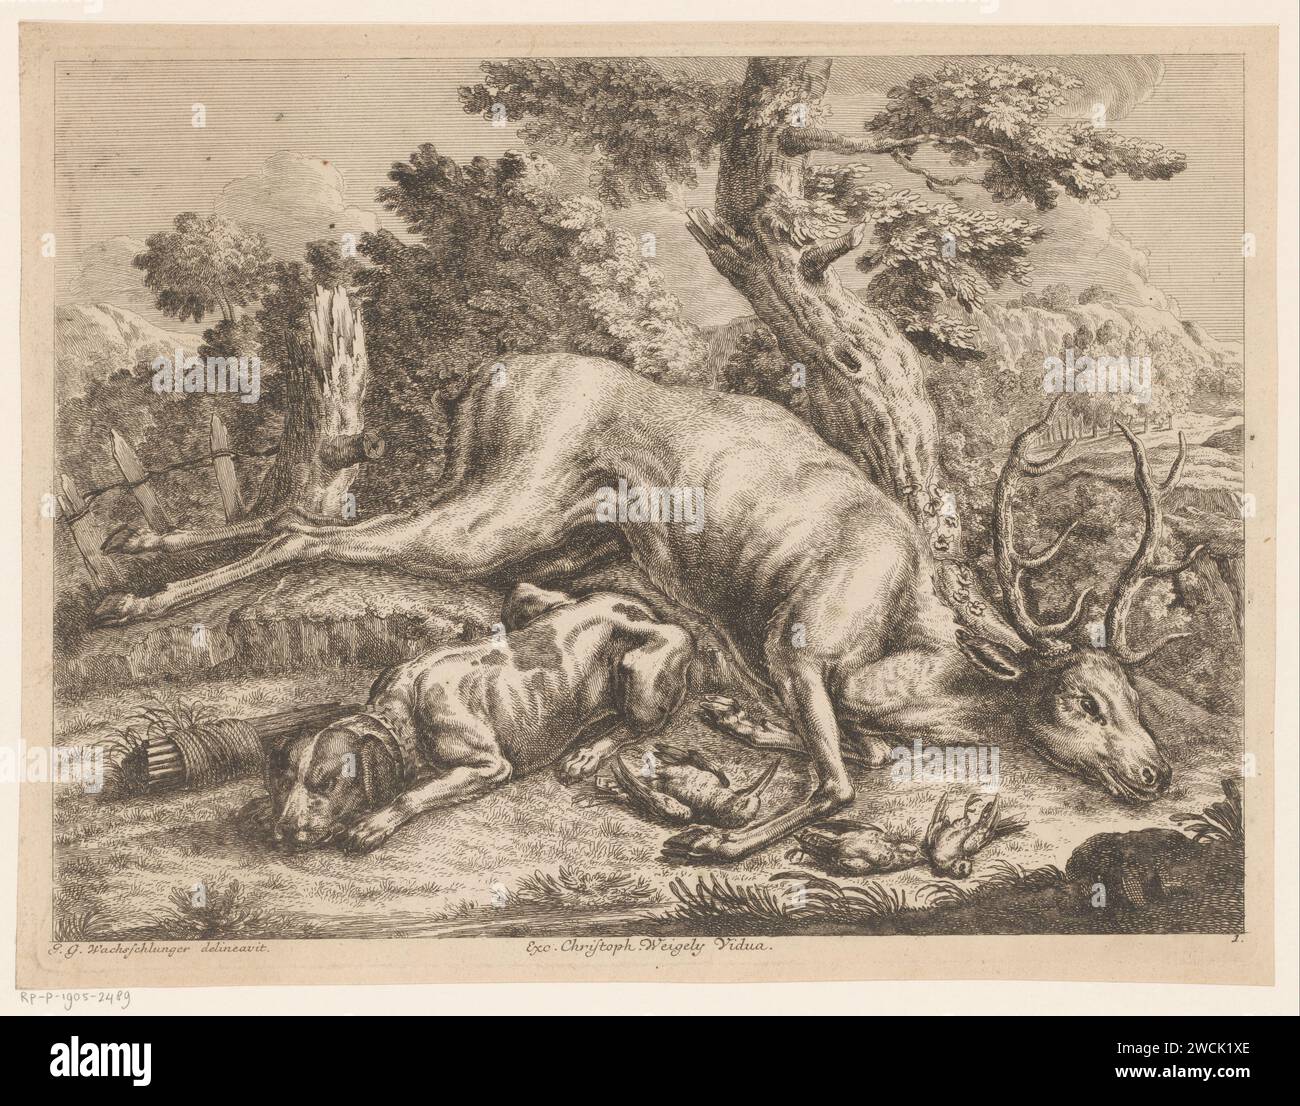 Hunting dog and hunting out with deer and birds, Johann Georg Wachsschlunger, 1725 - 1790 print Numbered below: 1. Neurenberg (possibly) paper etching spoils of the hunt, game, venison. hoofed animals: deer. hunting dogs Stock Photo